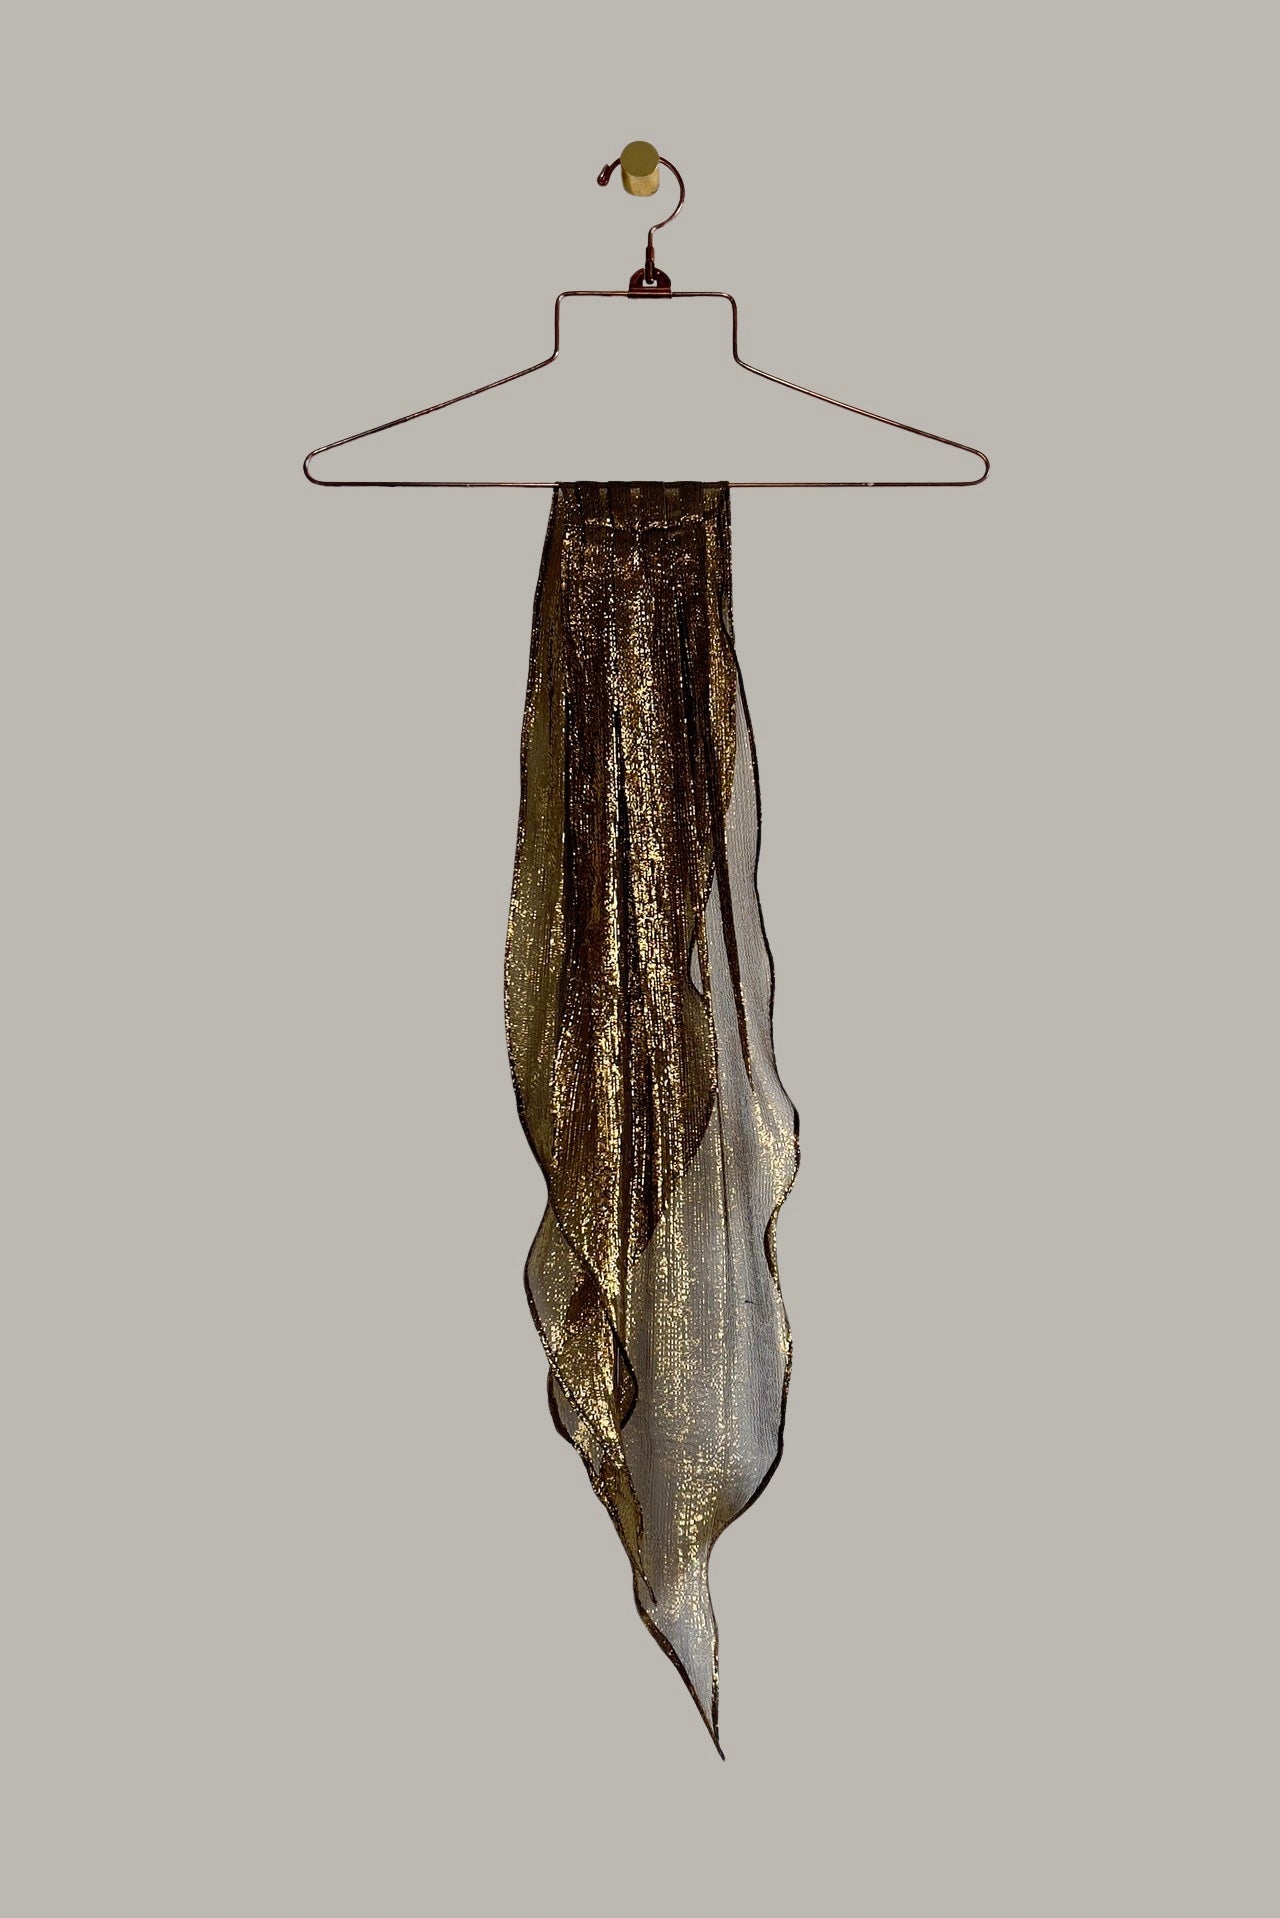 Unisex Infinite Bandeau Ascot Sash in Taupe/Gold Champagne